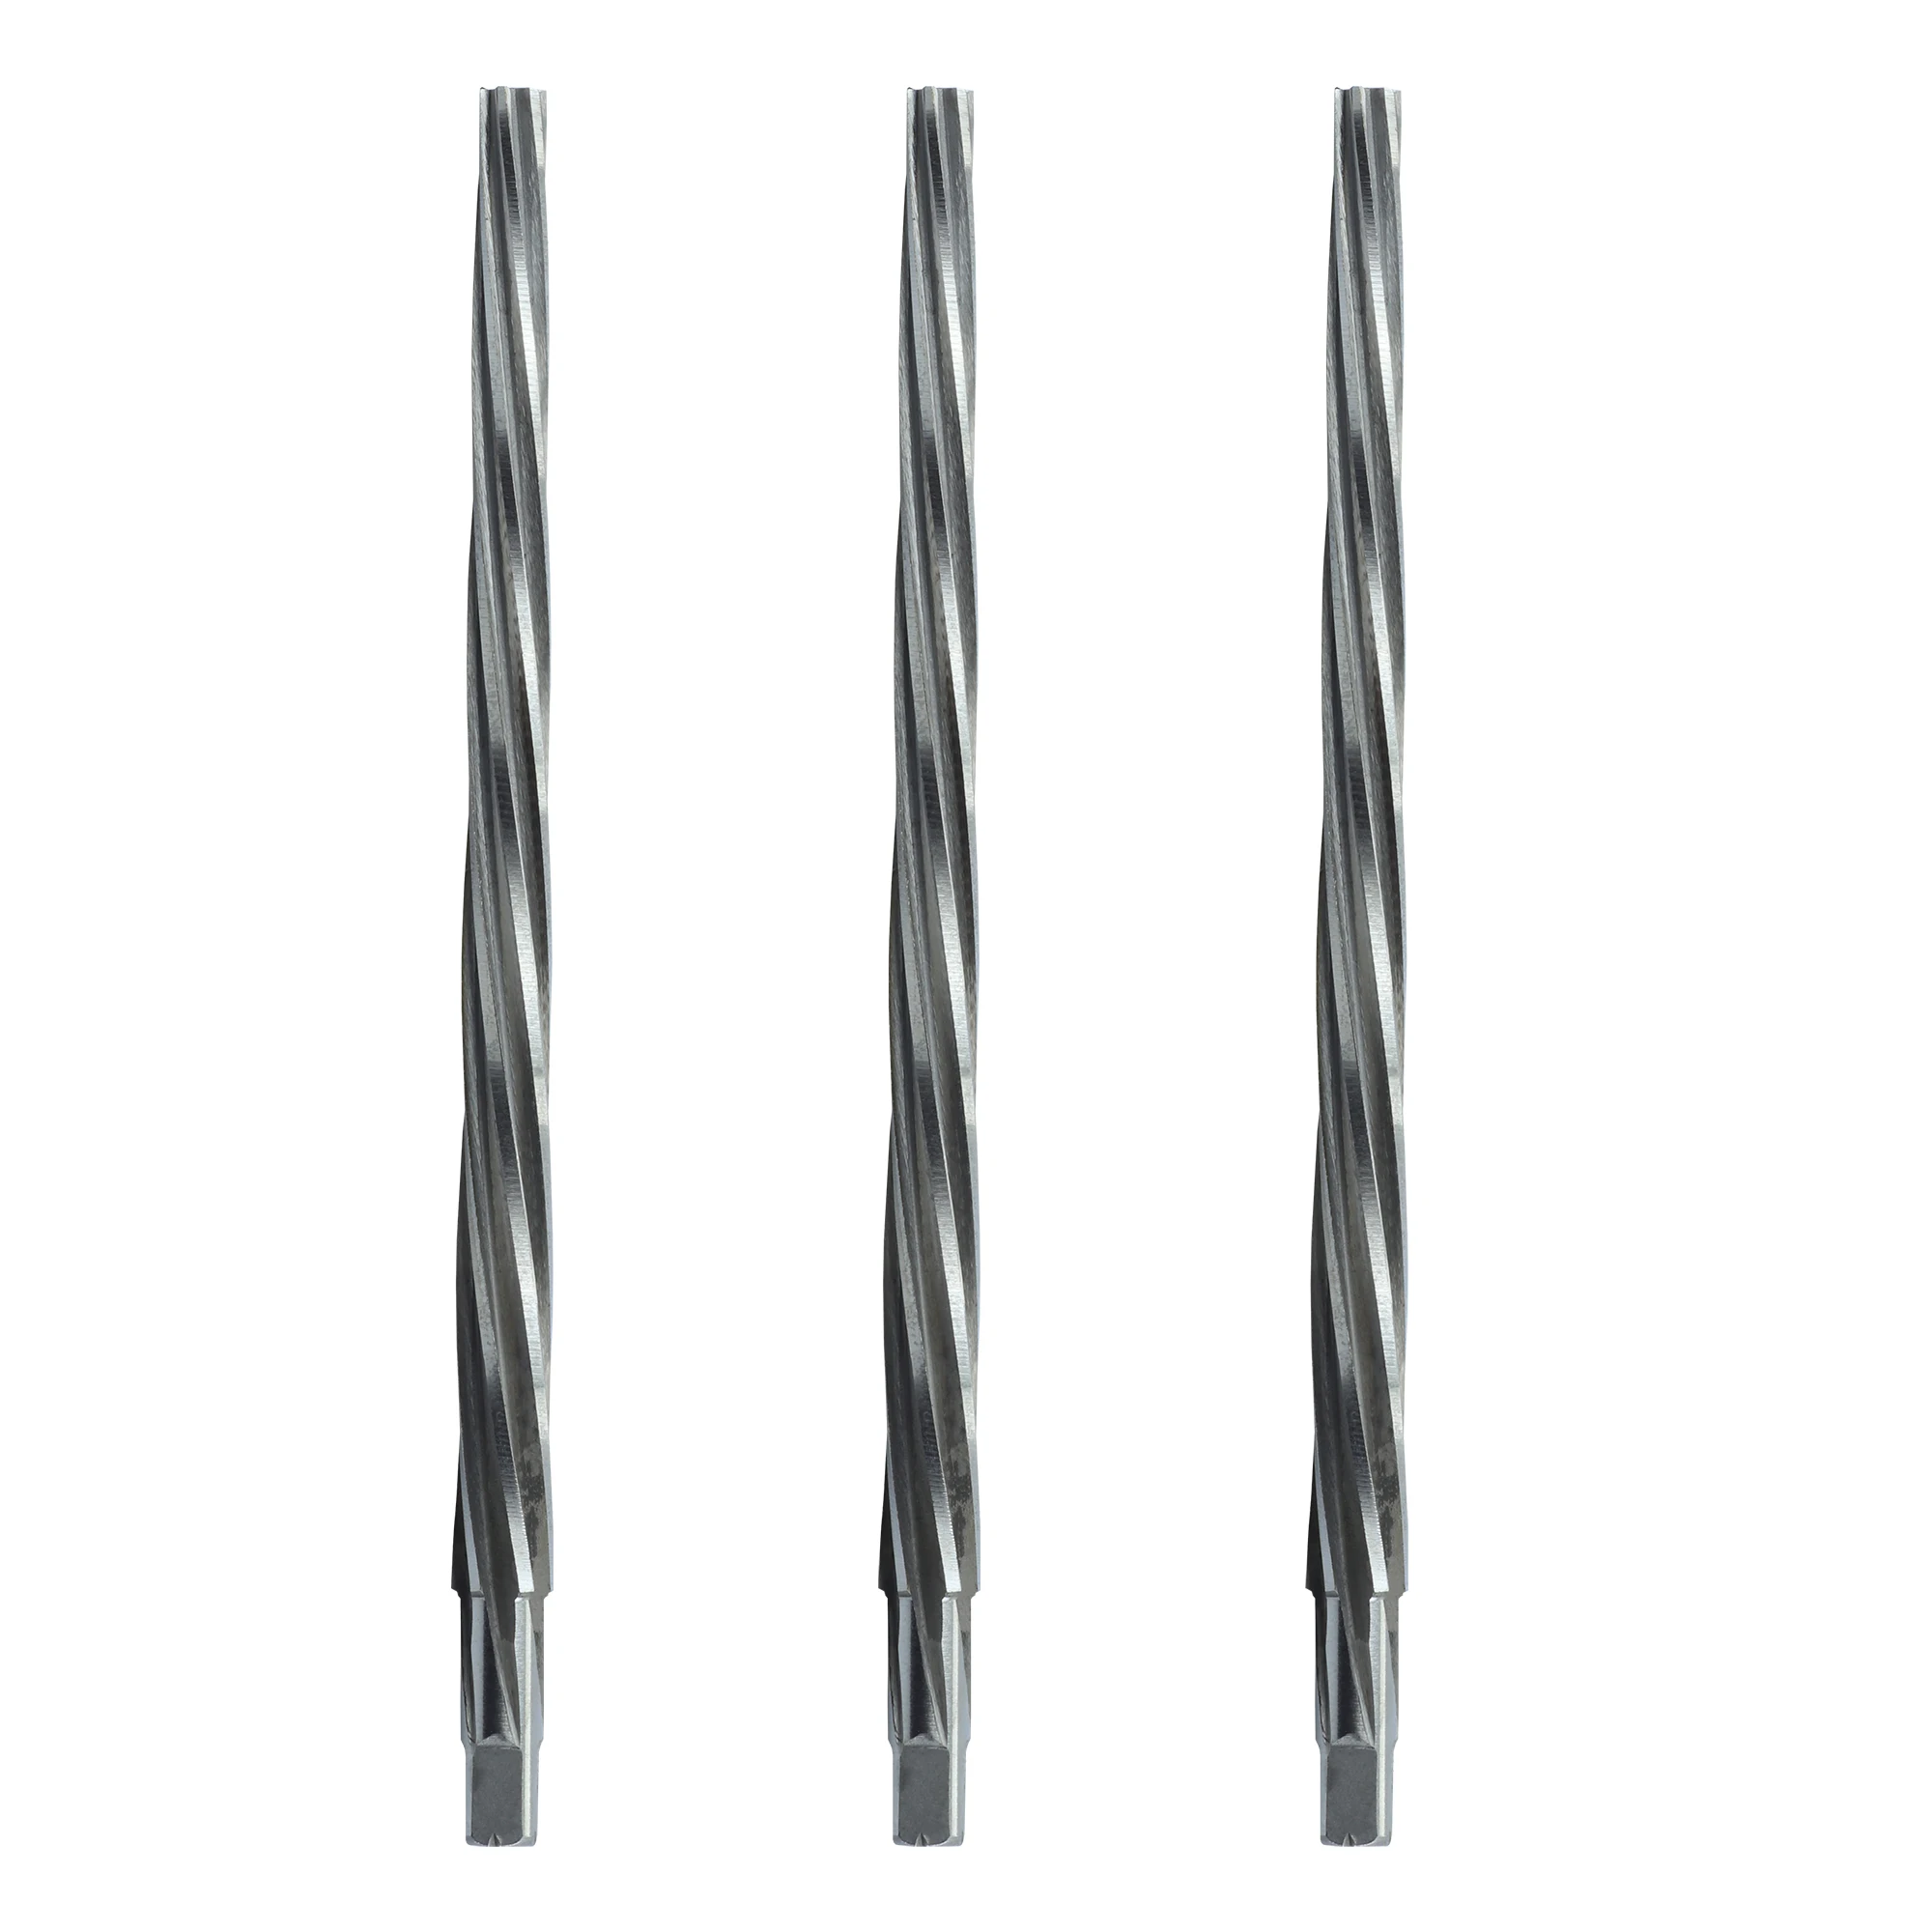 Taper Pin Hand Reamer 1:50 Conical Degree Sharp Manual Pin HSS M2 Blade Taper Shank Helix Hand Reamer CNC Tools